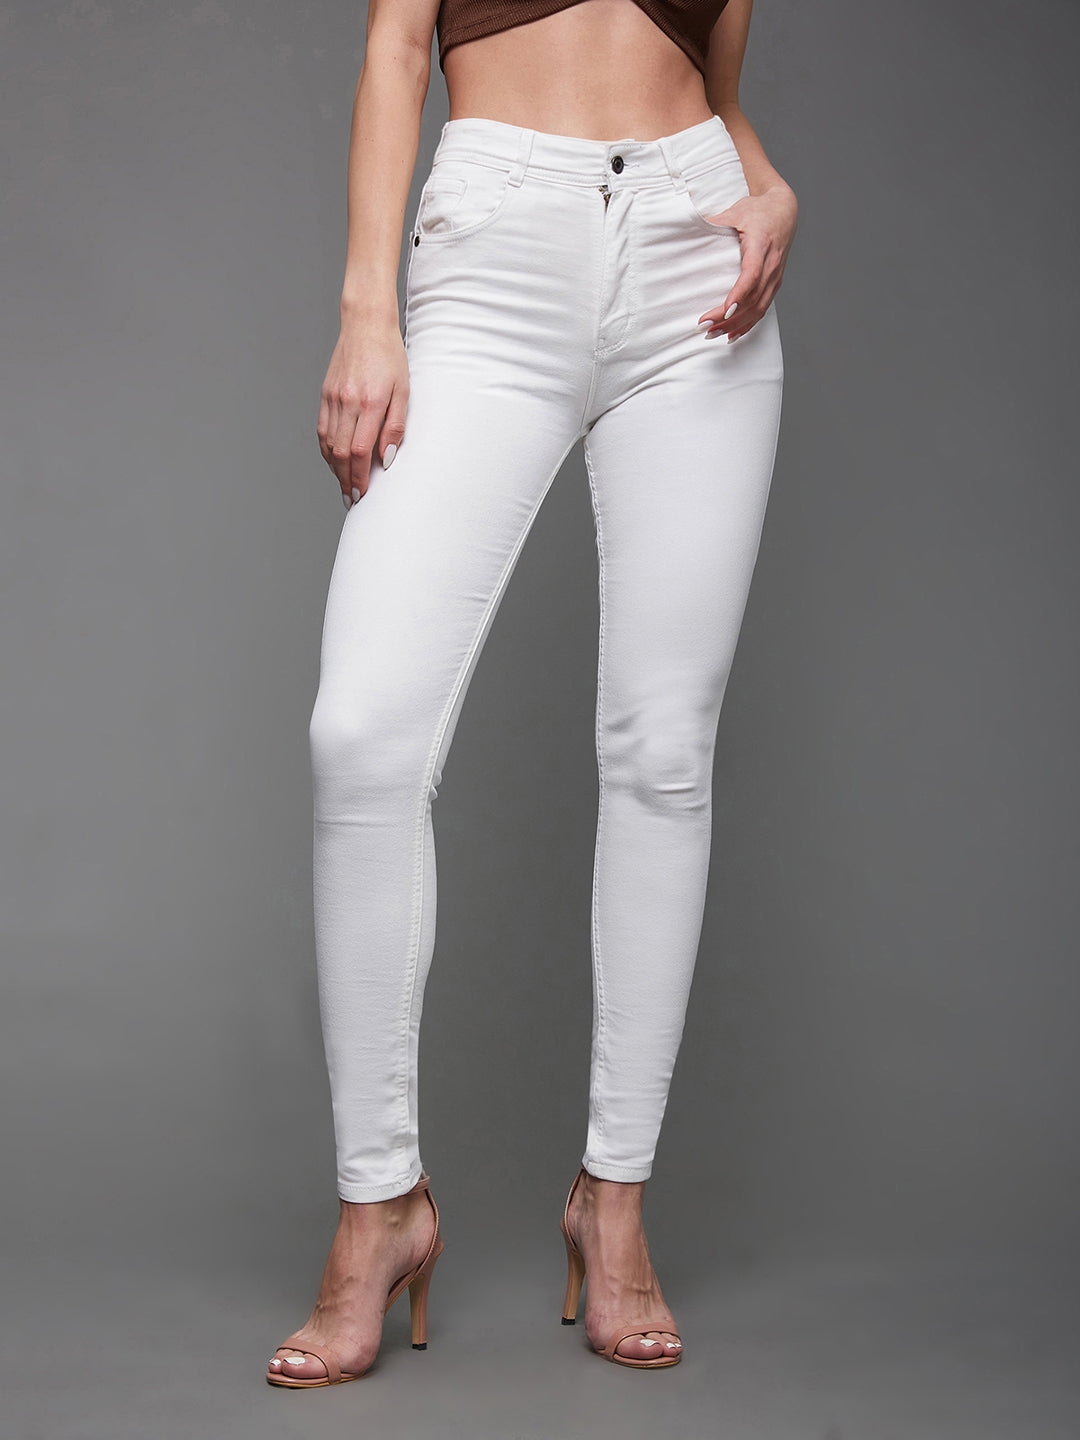 Women's White Solid Skinny Jeans